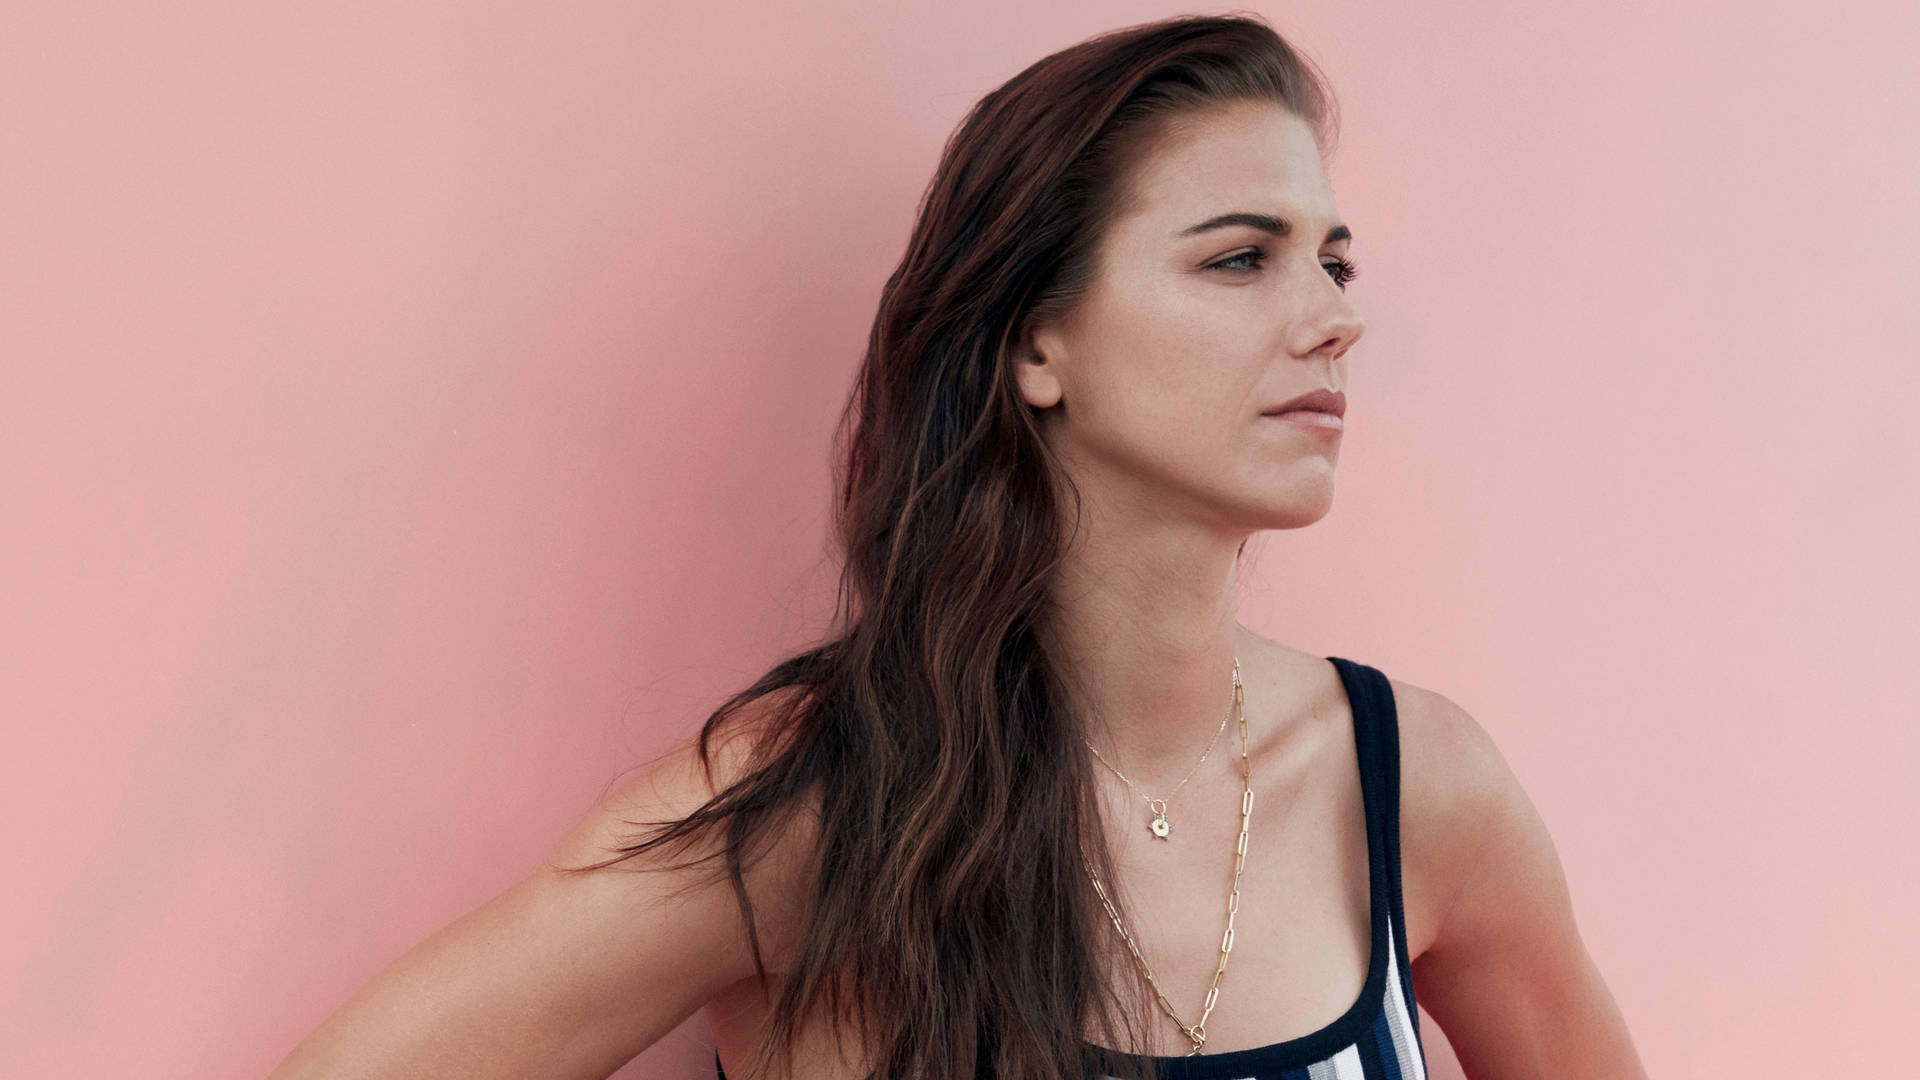 Alex Morgan In Pink Wall Background